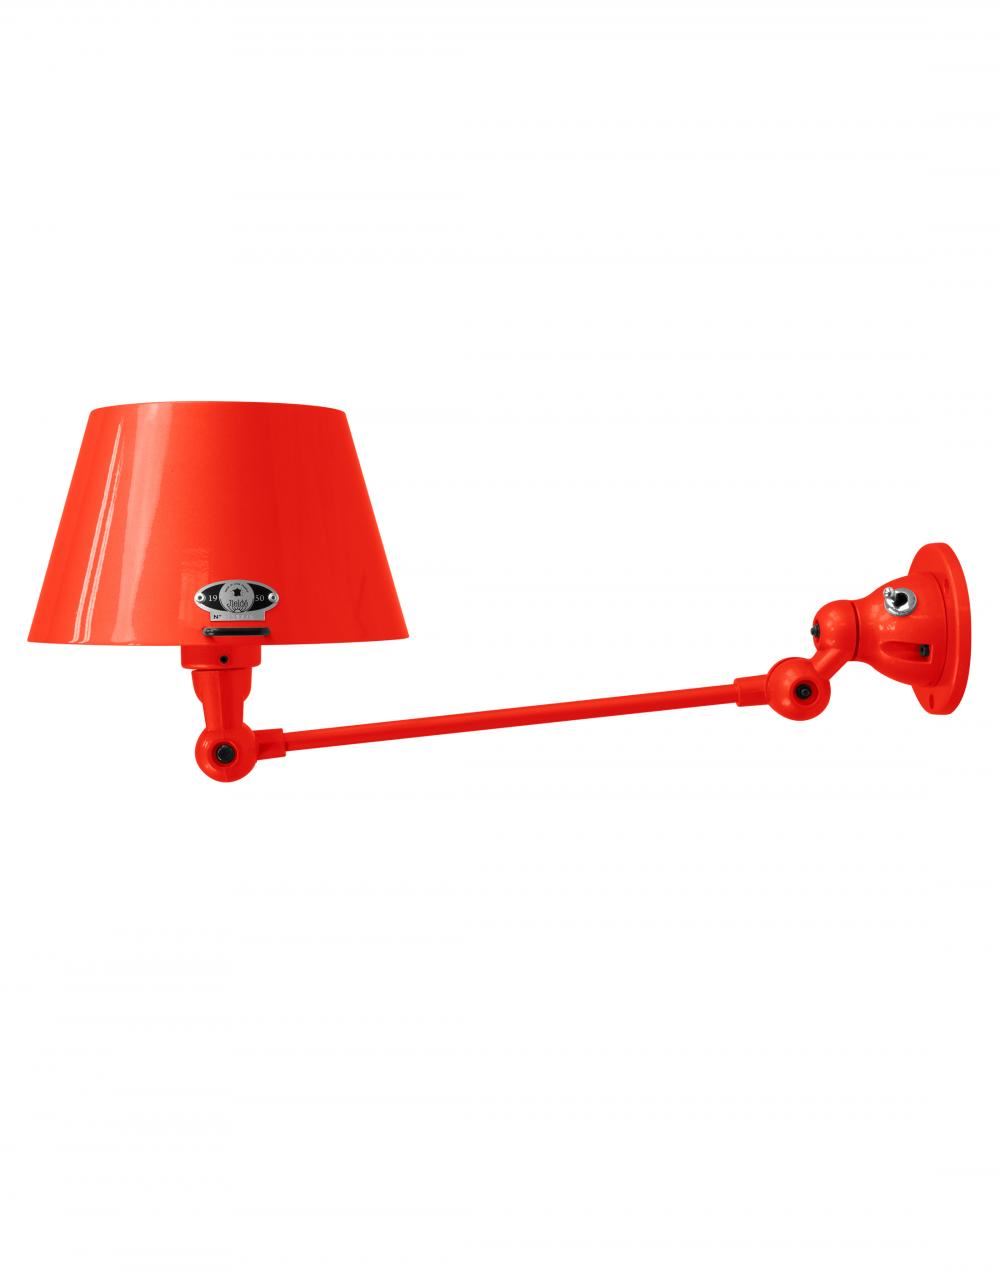 Jielde Aicler One Arm Adjustable Wall Light Straight Shade Red Gloss Integral Switch On Wall Base